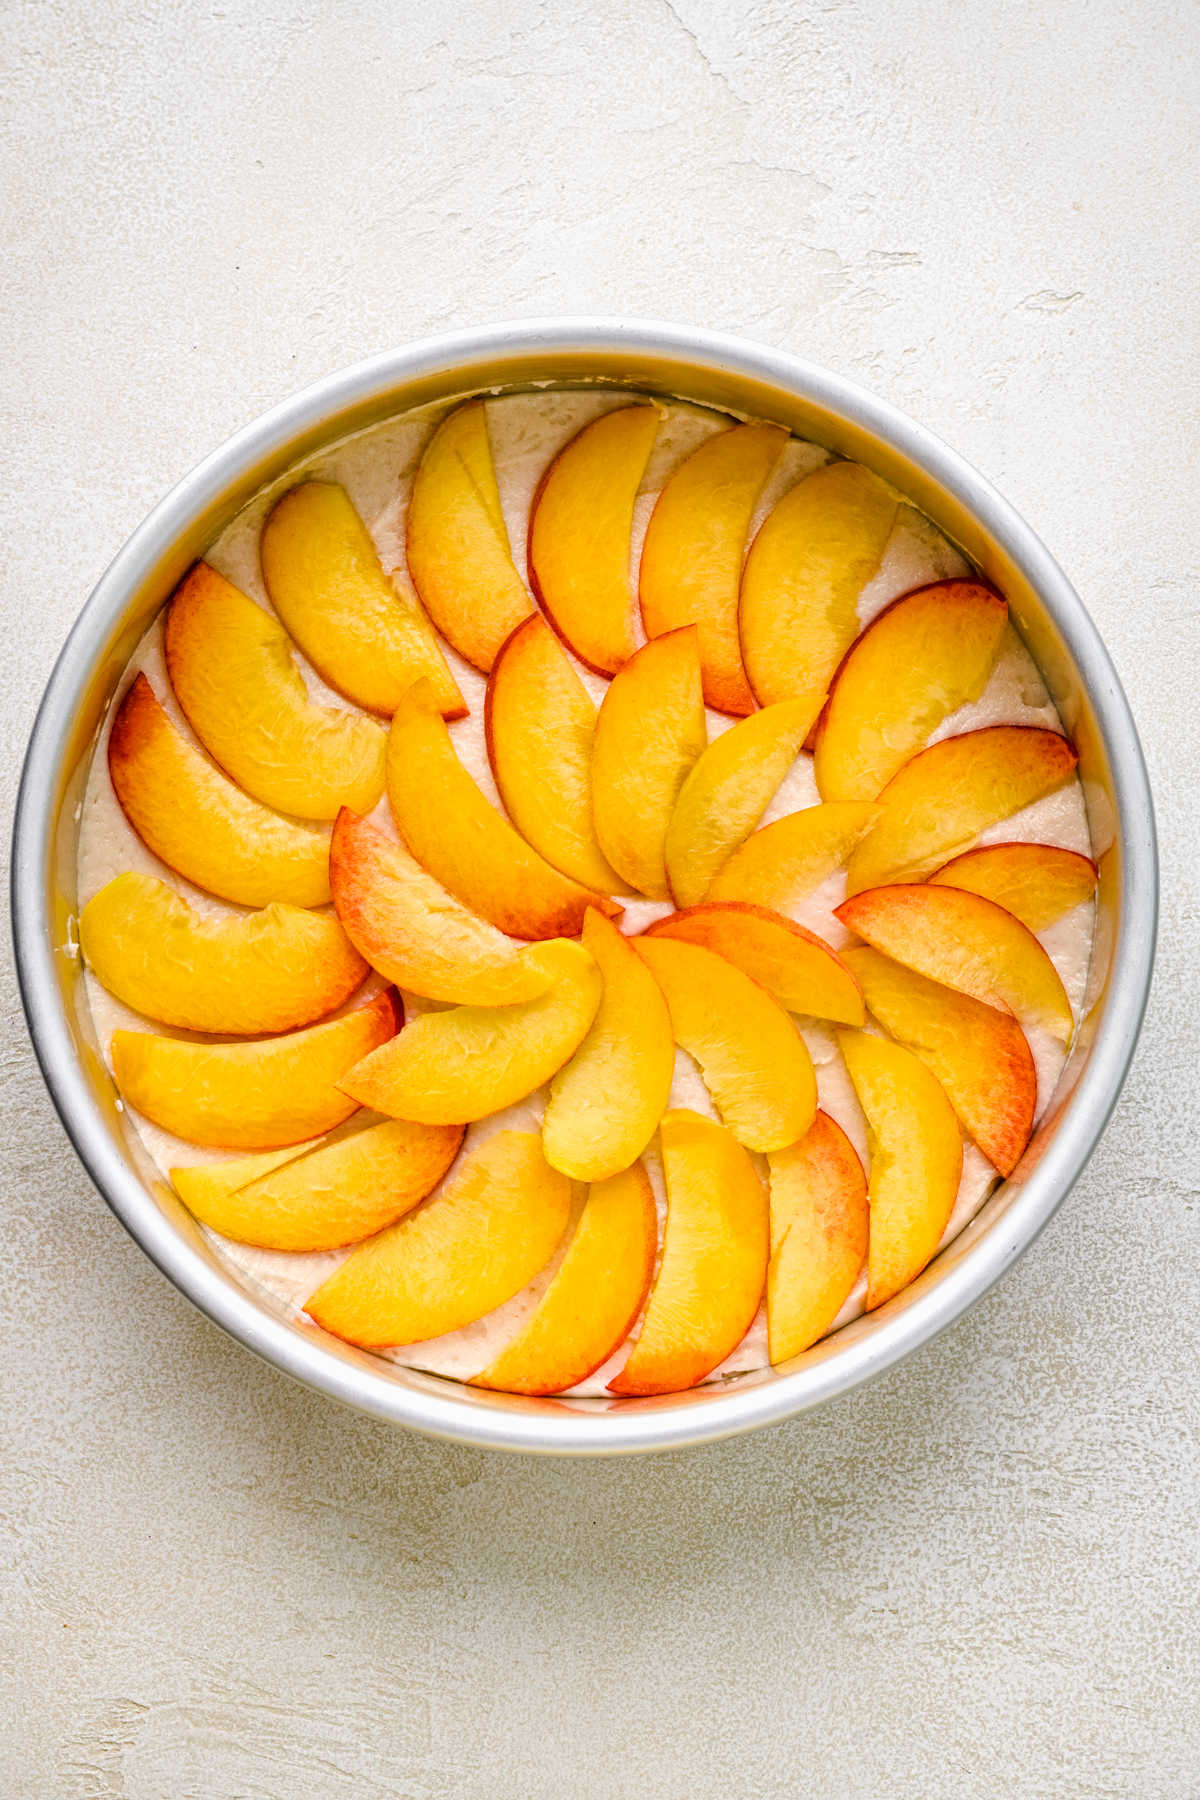 Slices of fresh peach over cake batter in a cake pan.